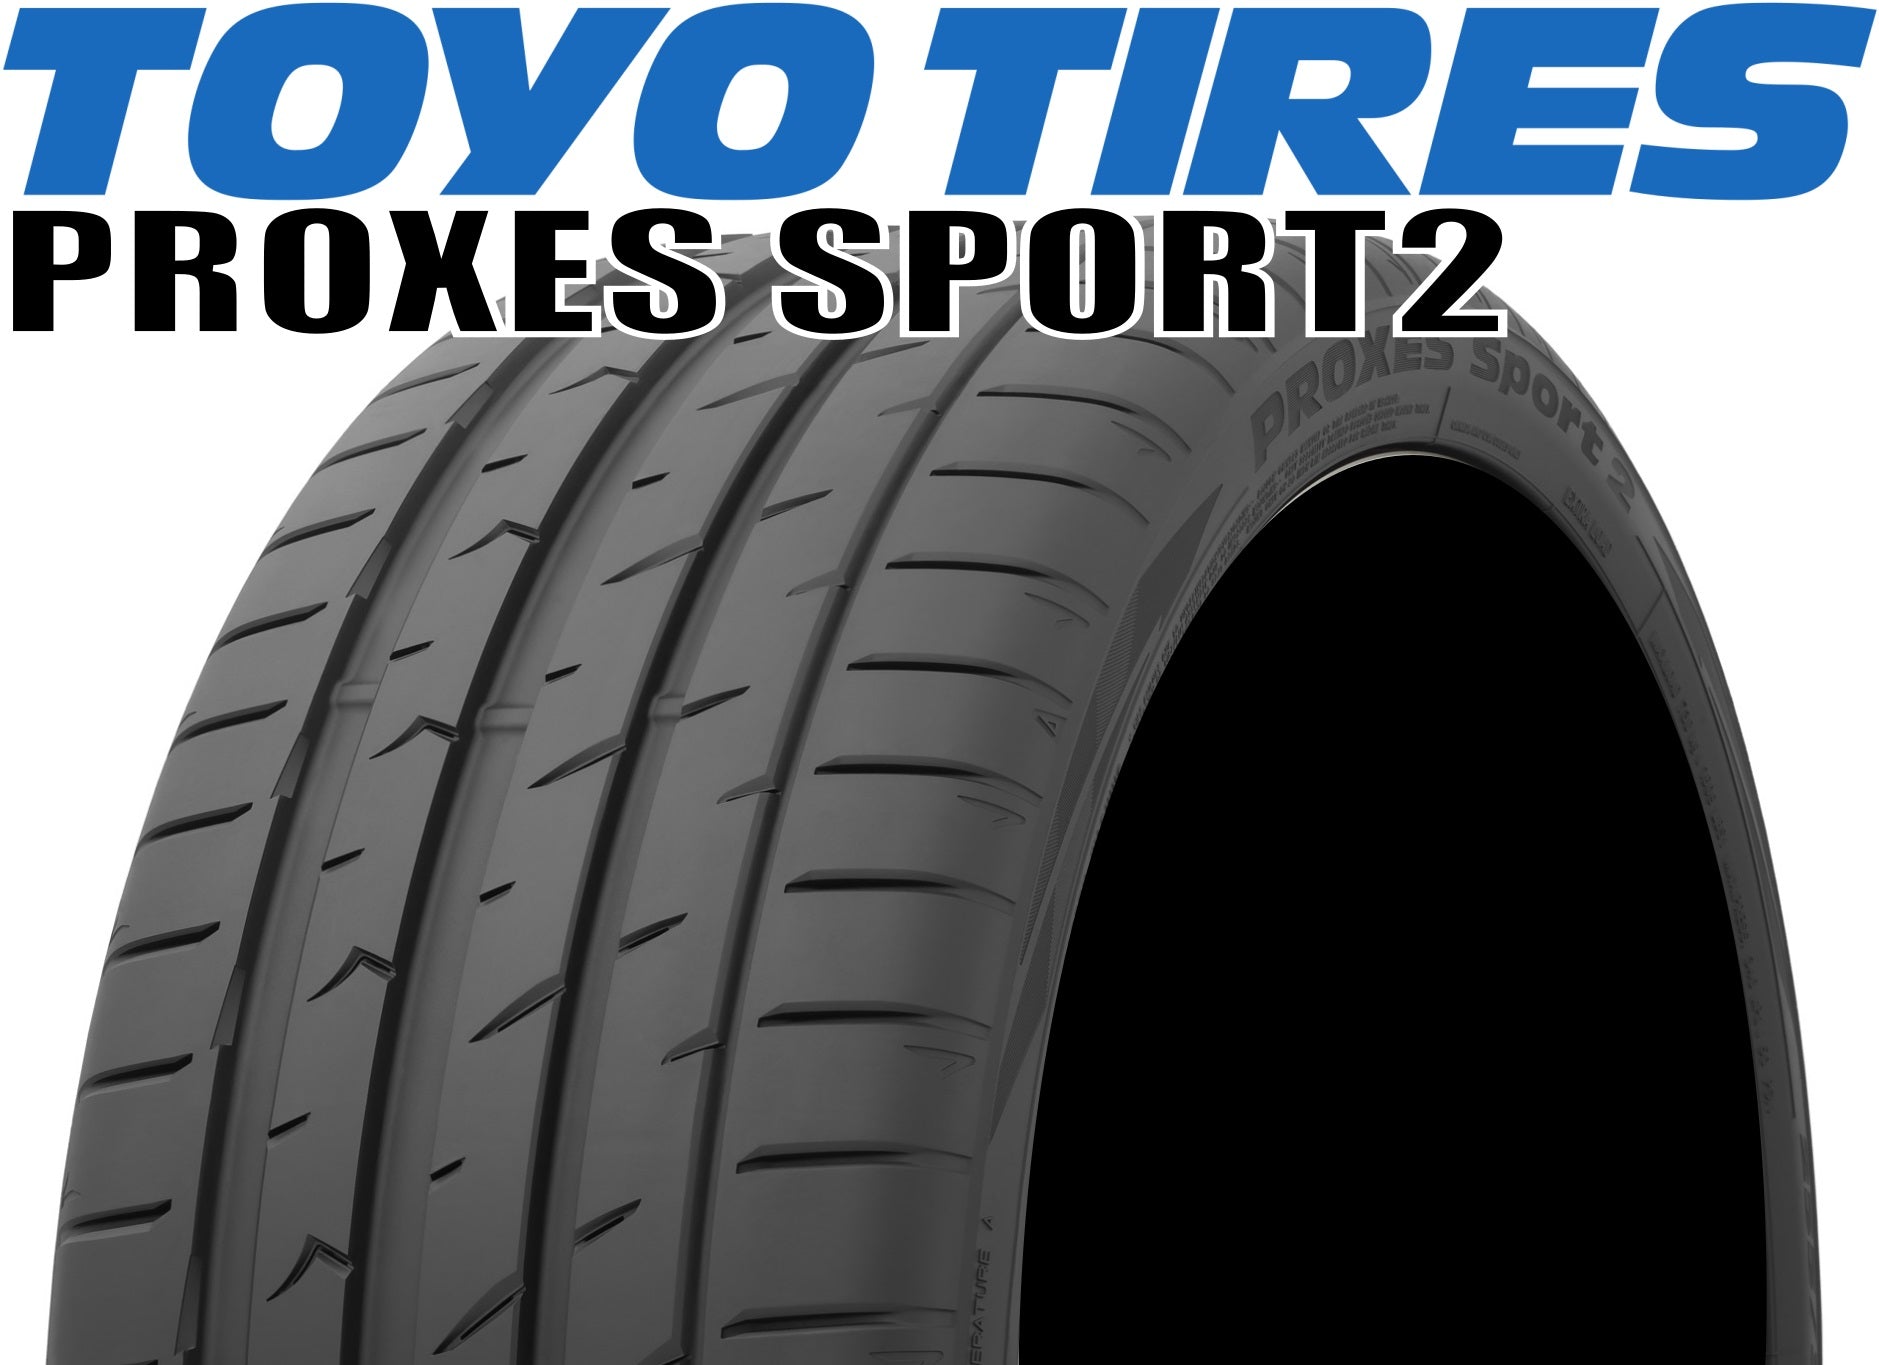 TOYO TIRES PROXES SPORT2(トーヨー プロクセススポーツ) 215/45R17 91Y XL (215/45-17 9